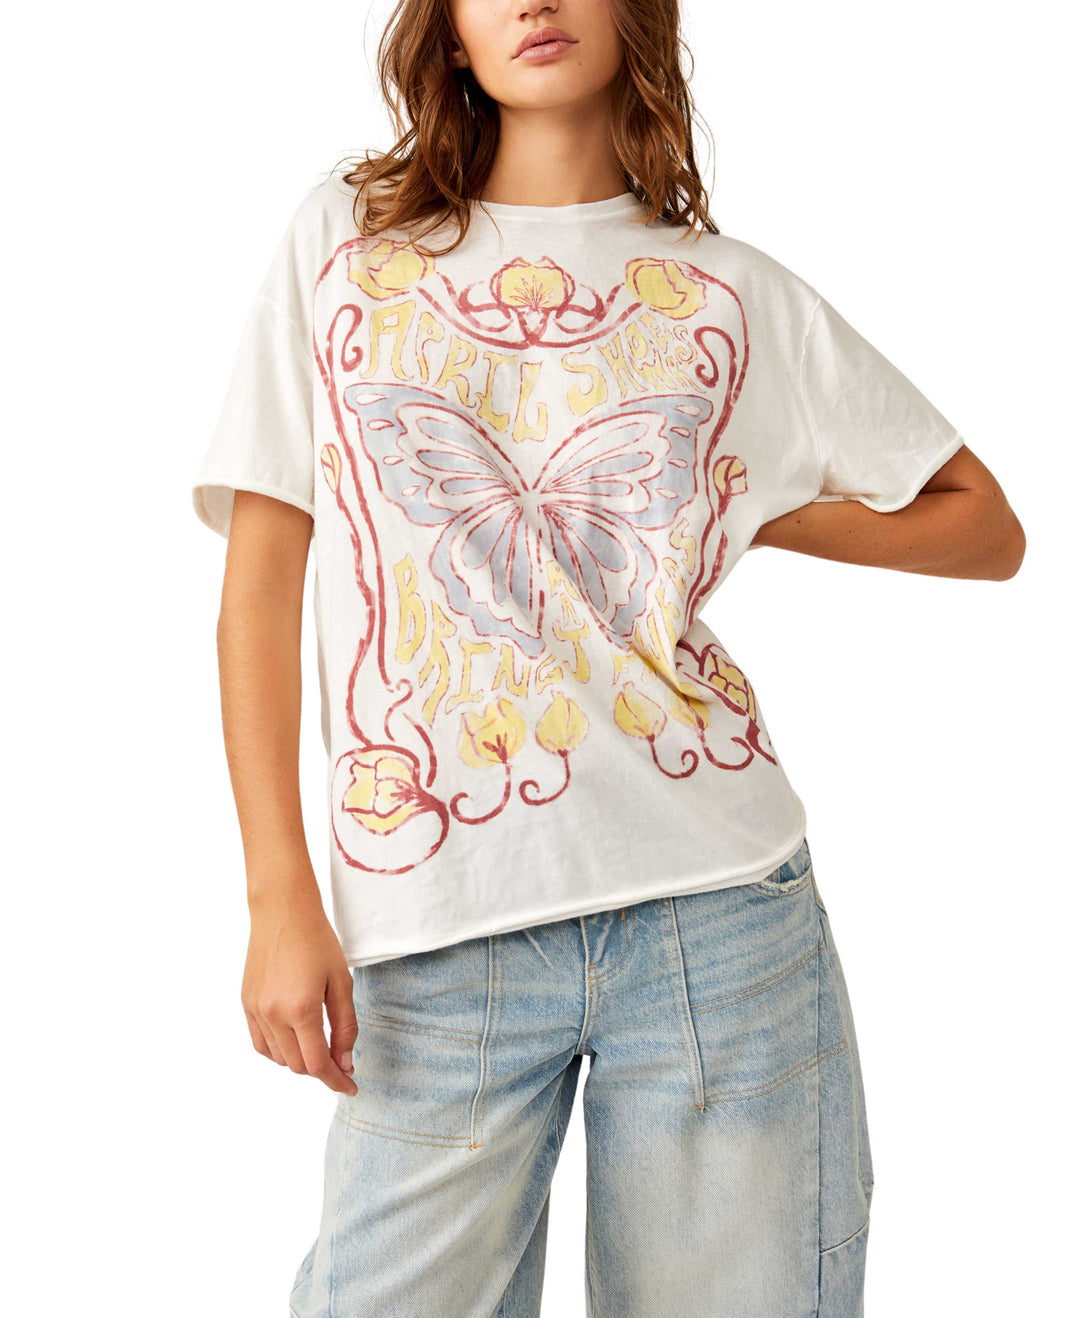 Spring Showers Vintage White Combo Tee